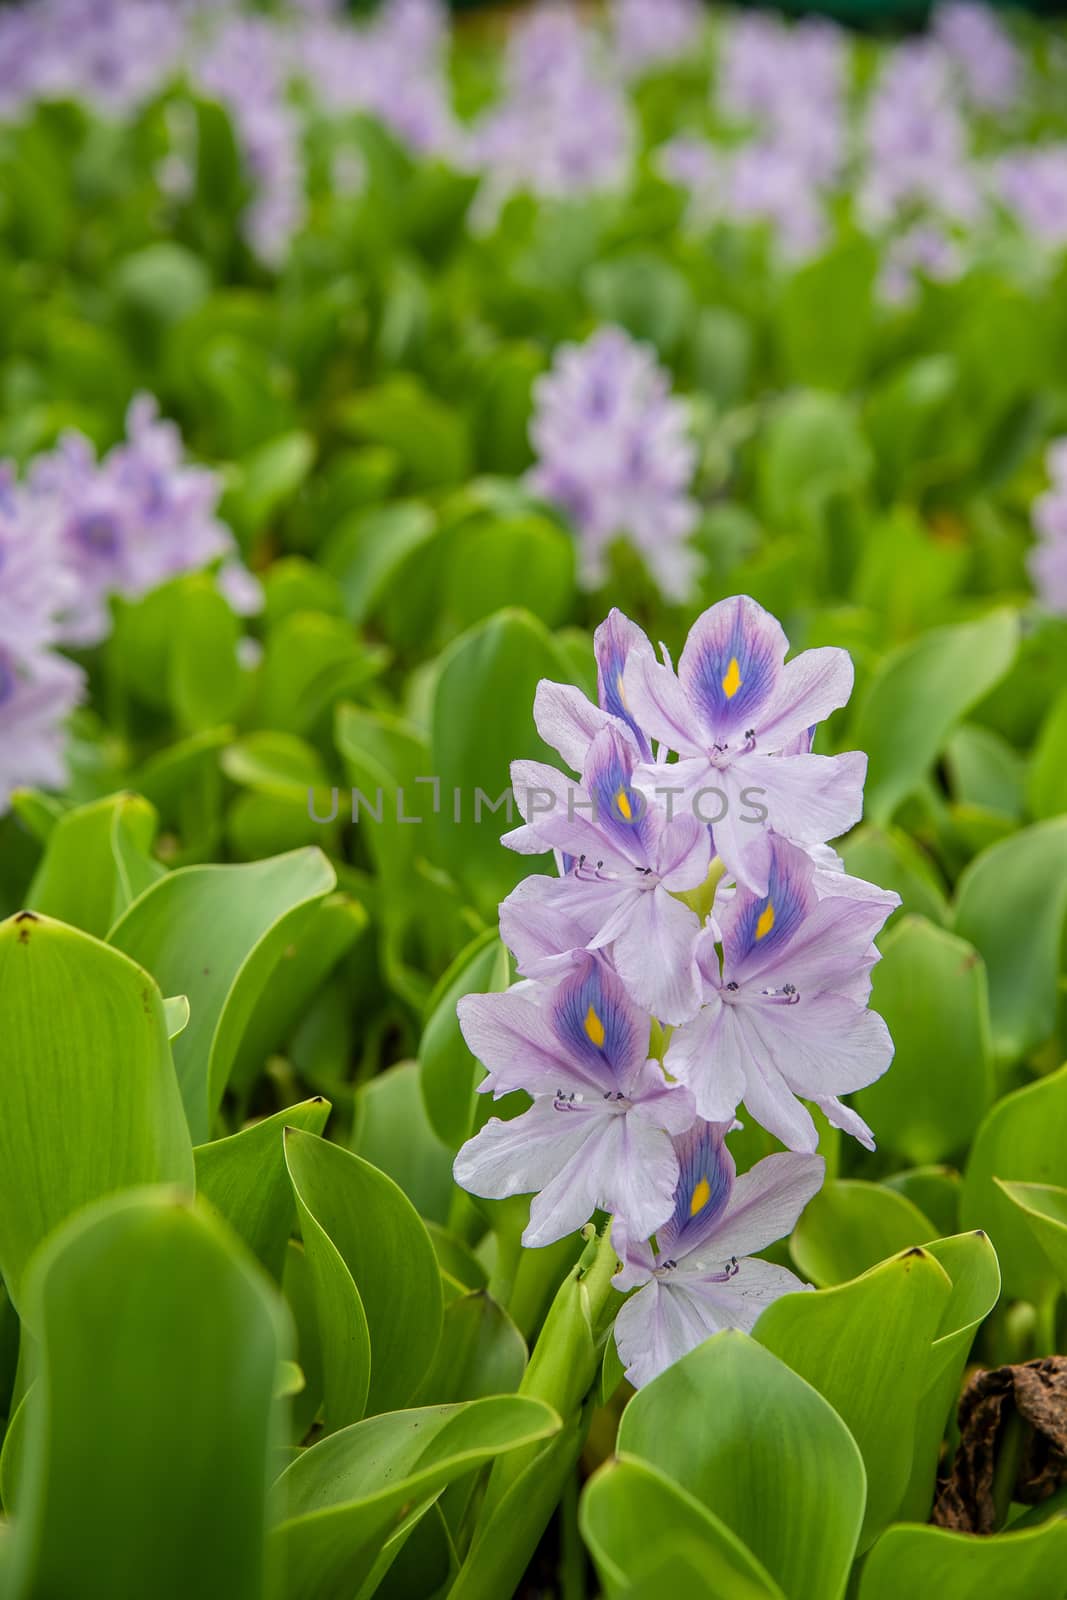 Flowering Water Hyacinth or Eichhornia crassipes growing Wild in the pond